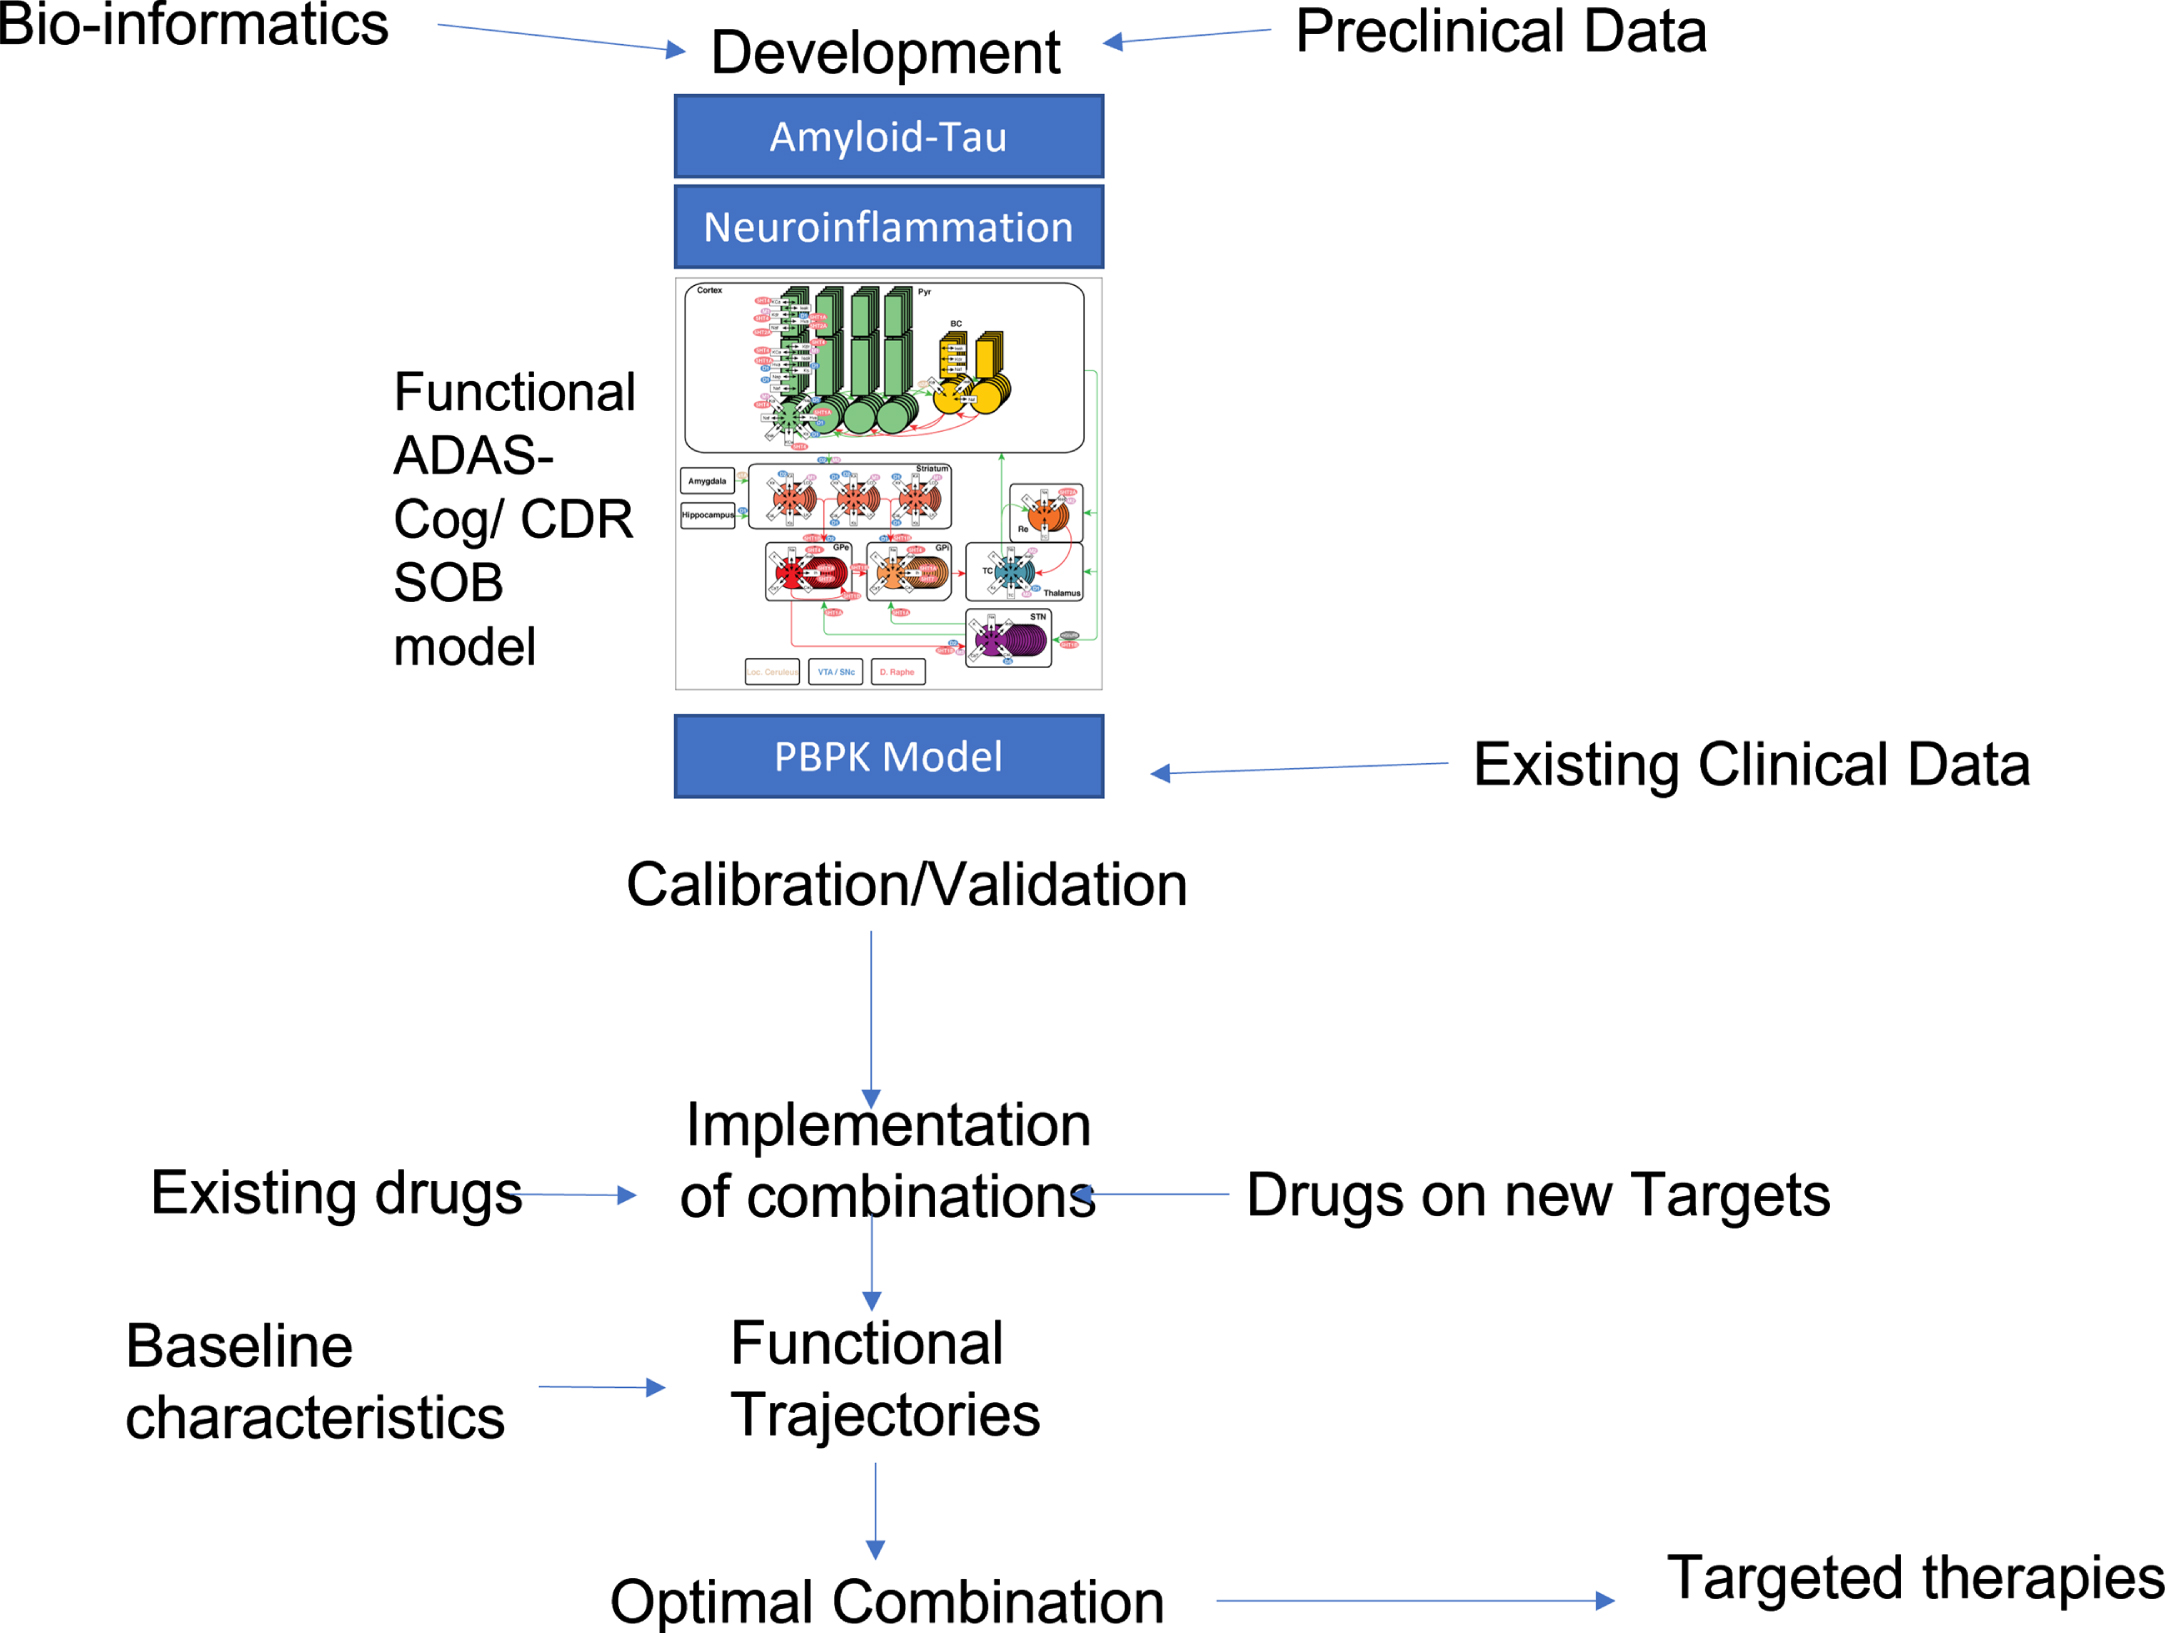 Possible flow-chart of knowledge-driven QSP identification of optimal treatment combinations. An existing QSP model that includes amyloid-tau pathology modeling, neuroinflammation, and a functional ADAS-Cog calibrated neuronal circuit is informed by preclinical, clinical observational and bio-informatics data. Target exposure of drugs currently tested in clinical trials is implemented using PBPK modeling to derive the functional impact in the QSP model. Calibration and validation are then performed with available clinical data, preferentially on individual patient outcomes. The validated QSP platform can then be used to systematically search all possible drug combinations and rank orders the outcomes for an AD patient with pre-specified baseline conditions. This process can then be repeated for subjects with varying baseline biomarkers conditions, allowing for more “targeted treatment” paradigm for certain baseline biomarkers signatures.